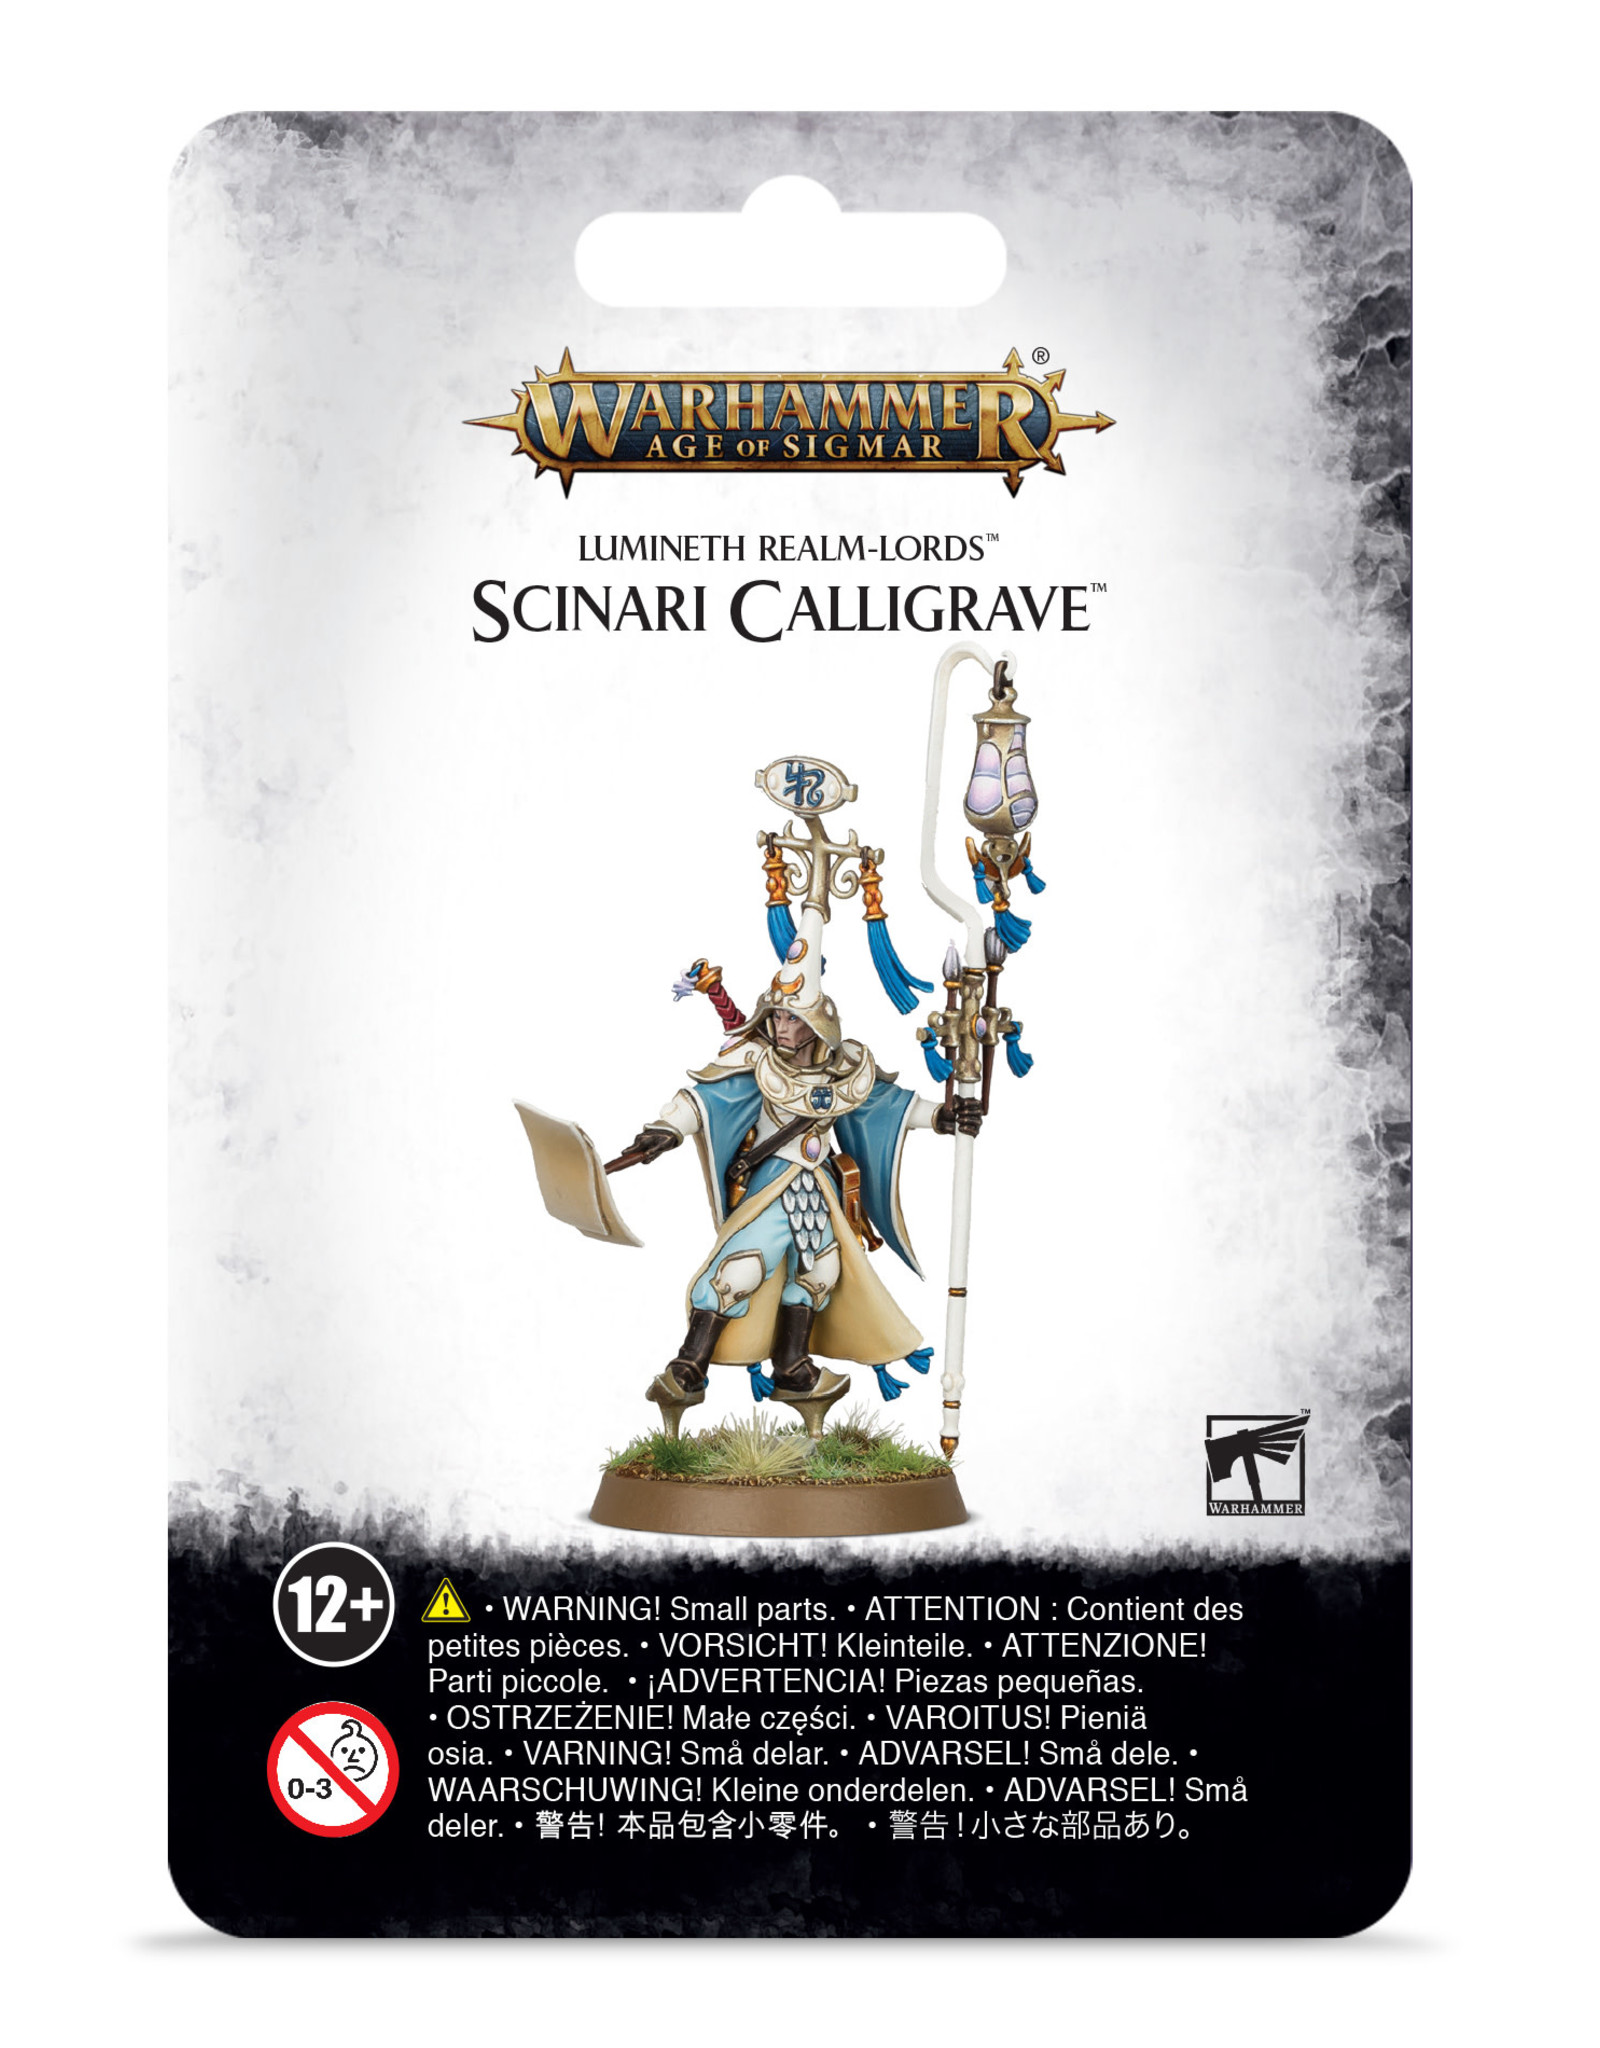 Games Workshop Warhammer AoS: Lumineth Realm-Lords Scinari Calligrave